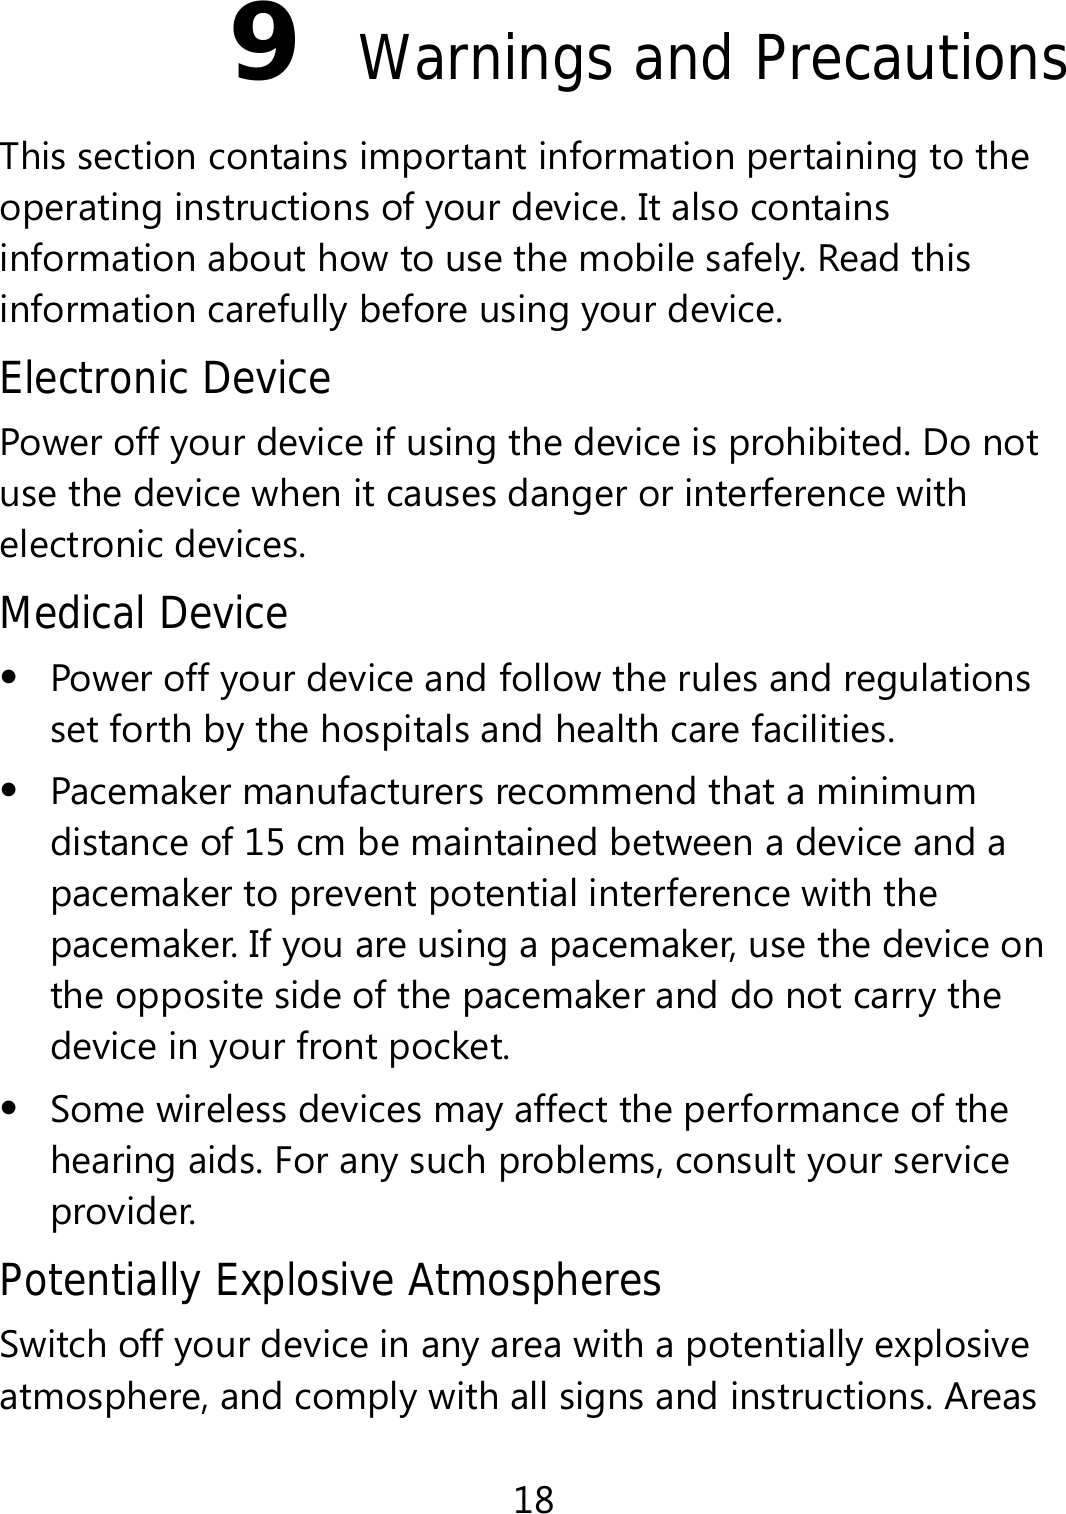 18 9  Warnings and Precautions This section contains important information pertaining to the operating instructions of your device. It also contains information about how to use the mobile safely. Read this information carefully before using your device. Electronic Device Power off your device if using the device is prohibited. Do not use the device when it causes danger or interference with electronic devices. Medical Device  Power off your device and follow the rules and regulations set forth by the hospitals and health care facilities.  Pacemaker manufacturers recommend that a minimum distance of 15 cm be maintained between a device and a pacemaker to prevent potential interference with the pacemaker. If you are using a pacemaker, use the device on the opposite side of the pacemaker and do not carry the device in your front pocket.  Some wireless devices may affect the performance of the hearing aids. For any such problems, consult your service provider. Potentially Explosive Atmospheres Switch off your device in any area with a potentially explosive atmosphere, and comply with all signs and instructions. Areas 